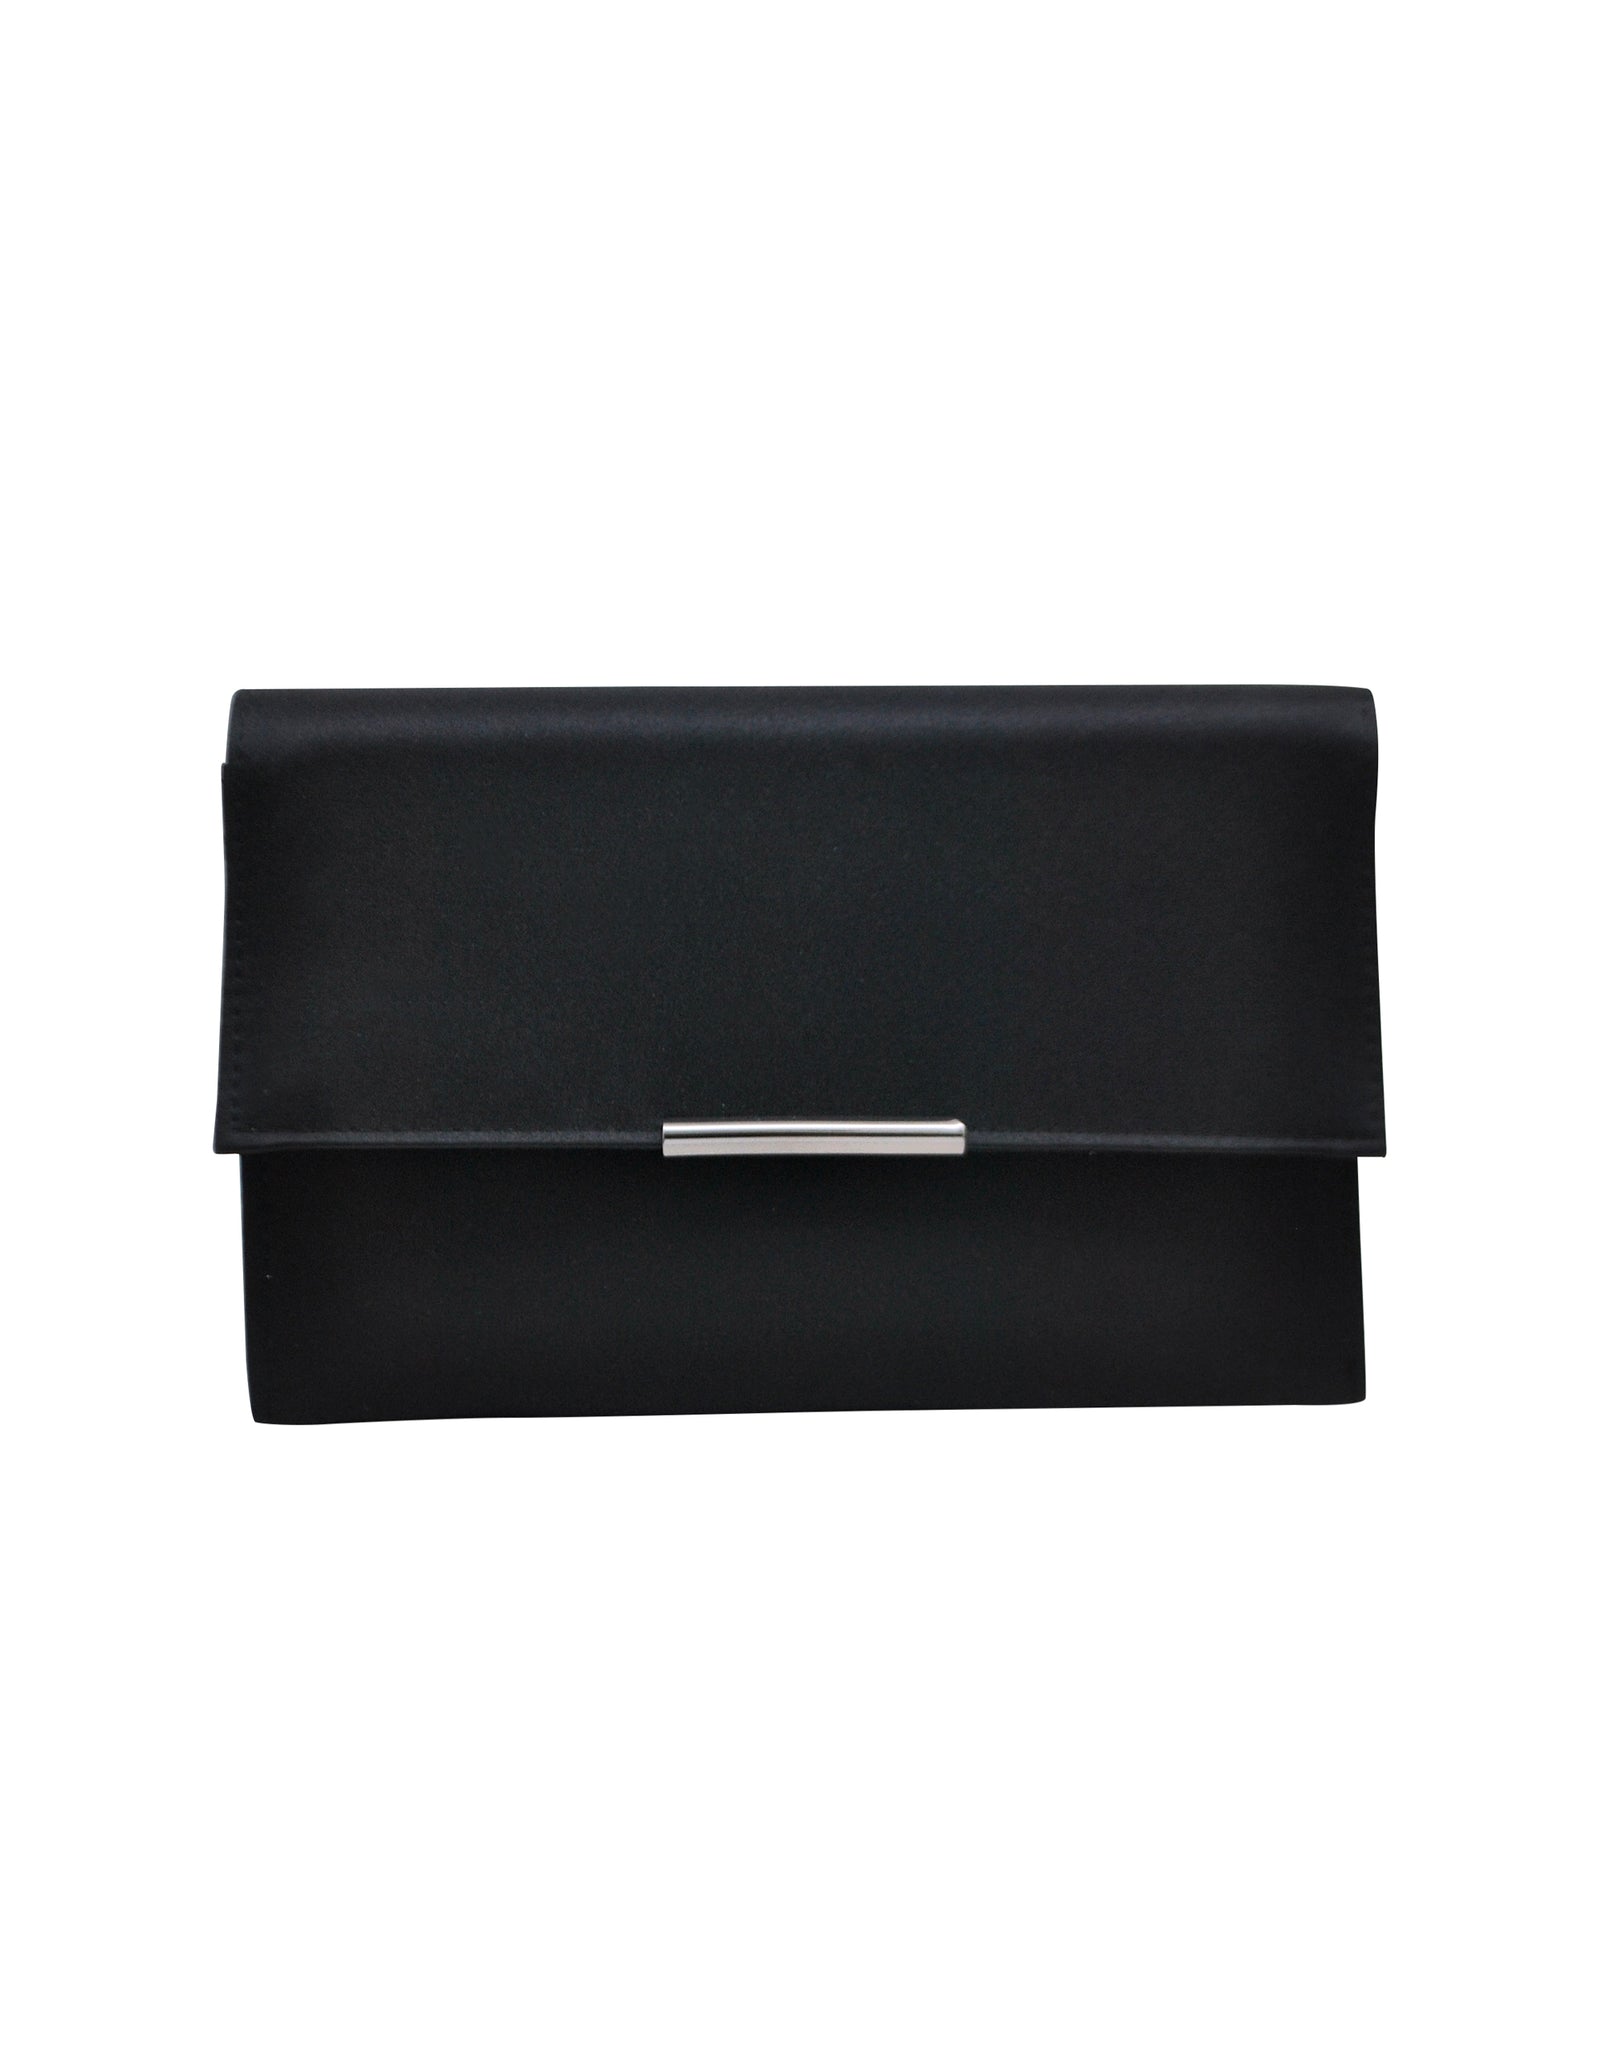 Haisley Satin Compartment Clutch